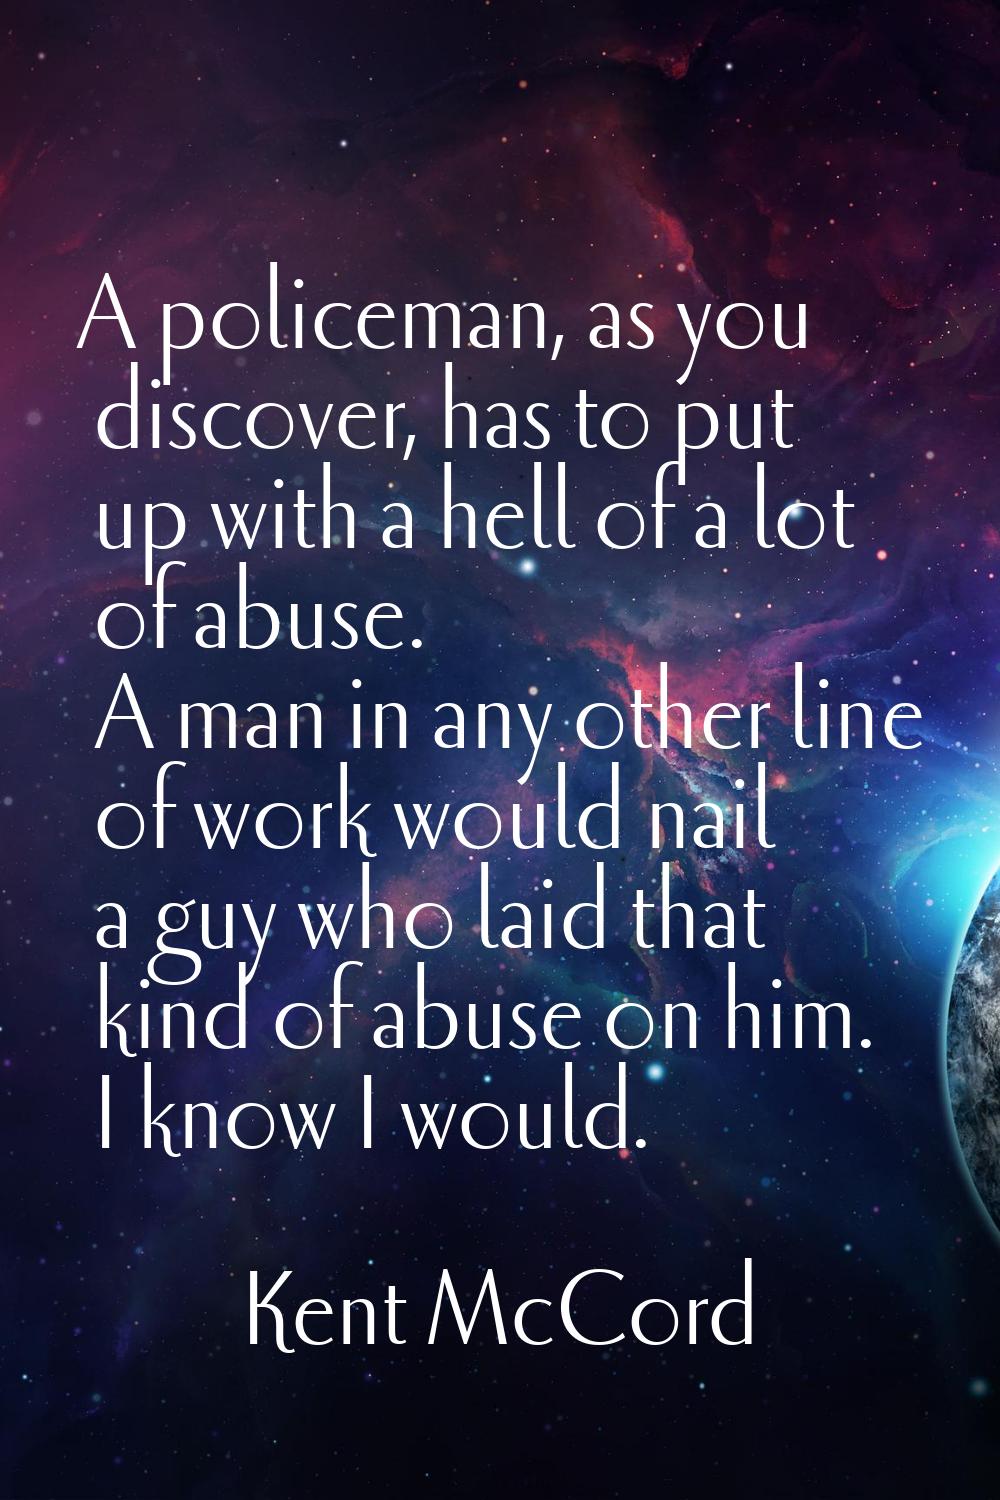 A policeman, as you discover, has to put up with a hell of a lot of abuse. A man in any other line 